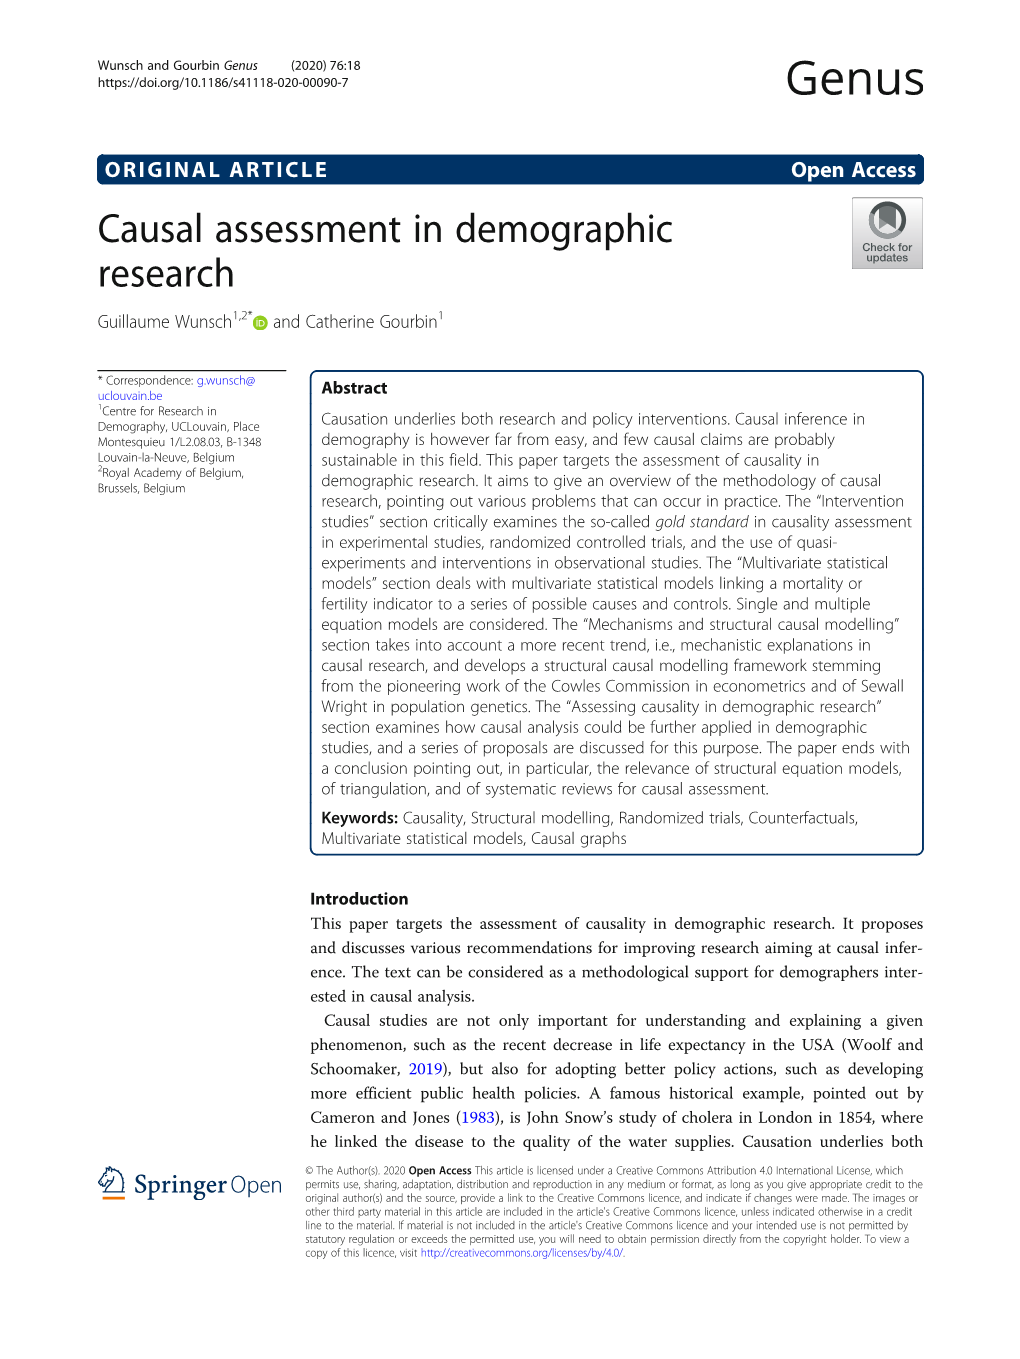 Causal Assessment in Demographic Research Guillaume Wunsch1,2* and Catherine Gourbin1